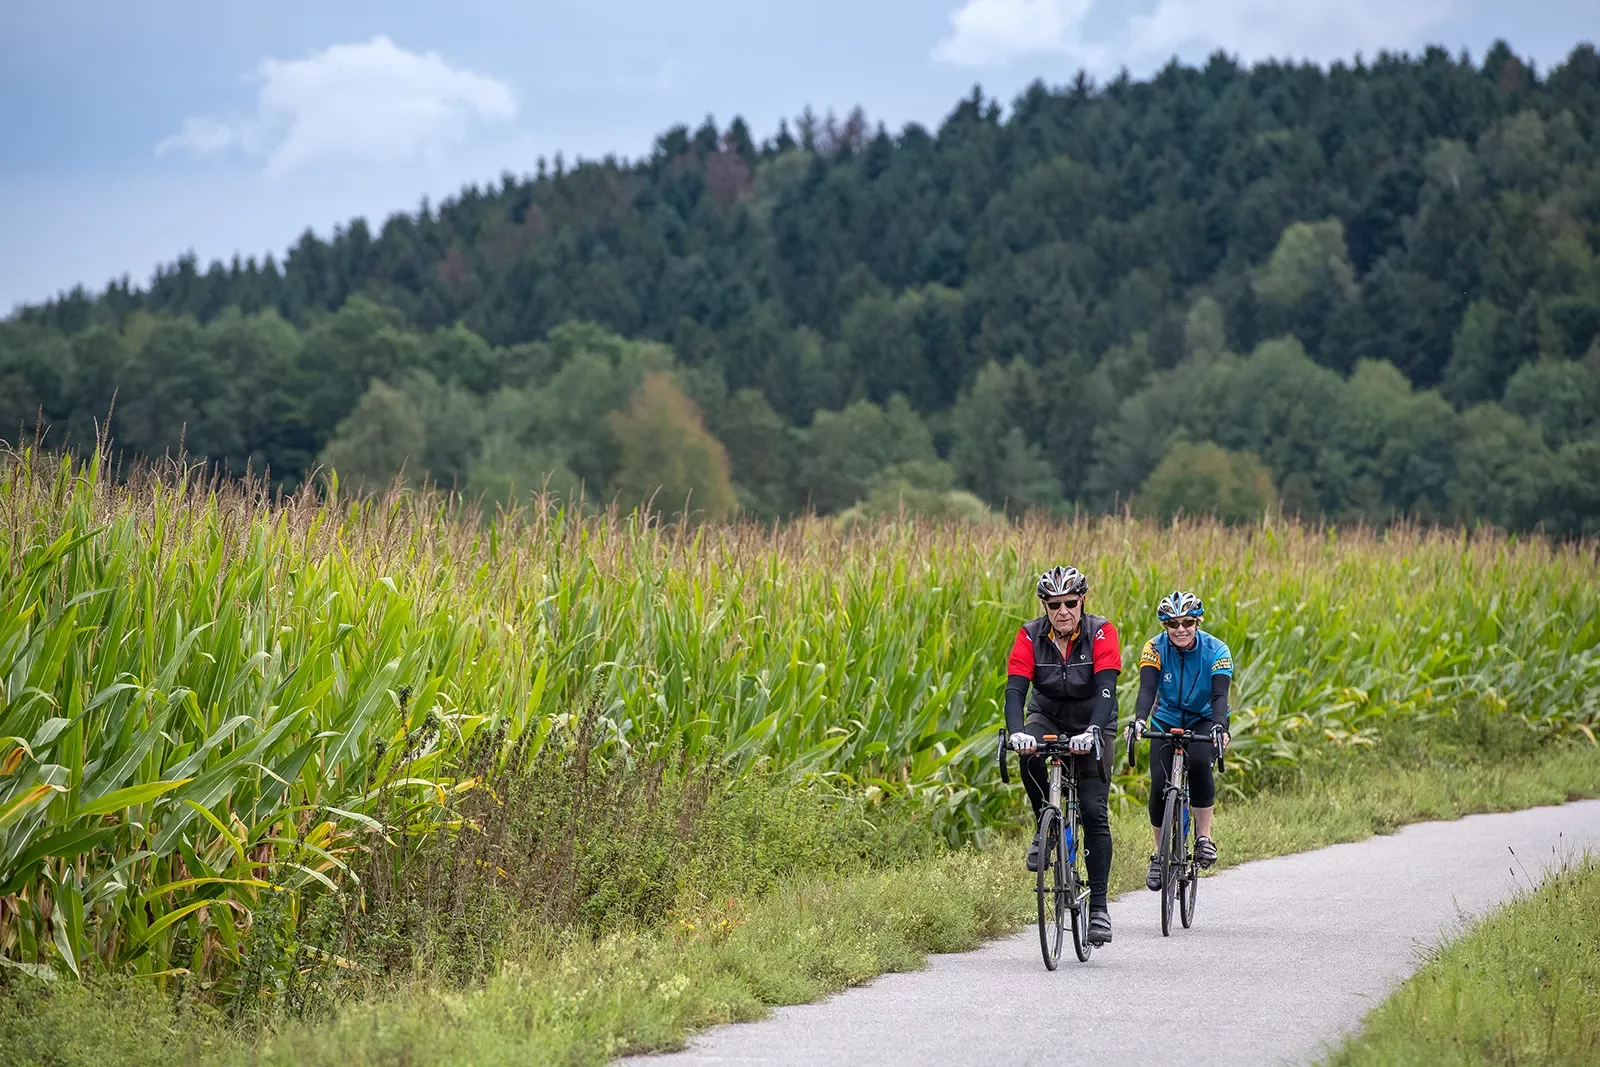 Two bikers riding on a road through a cornfield.